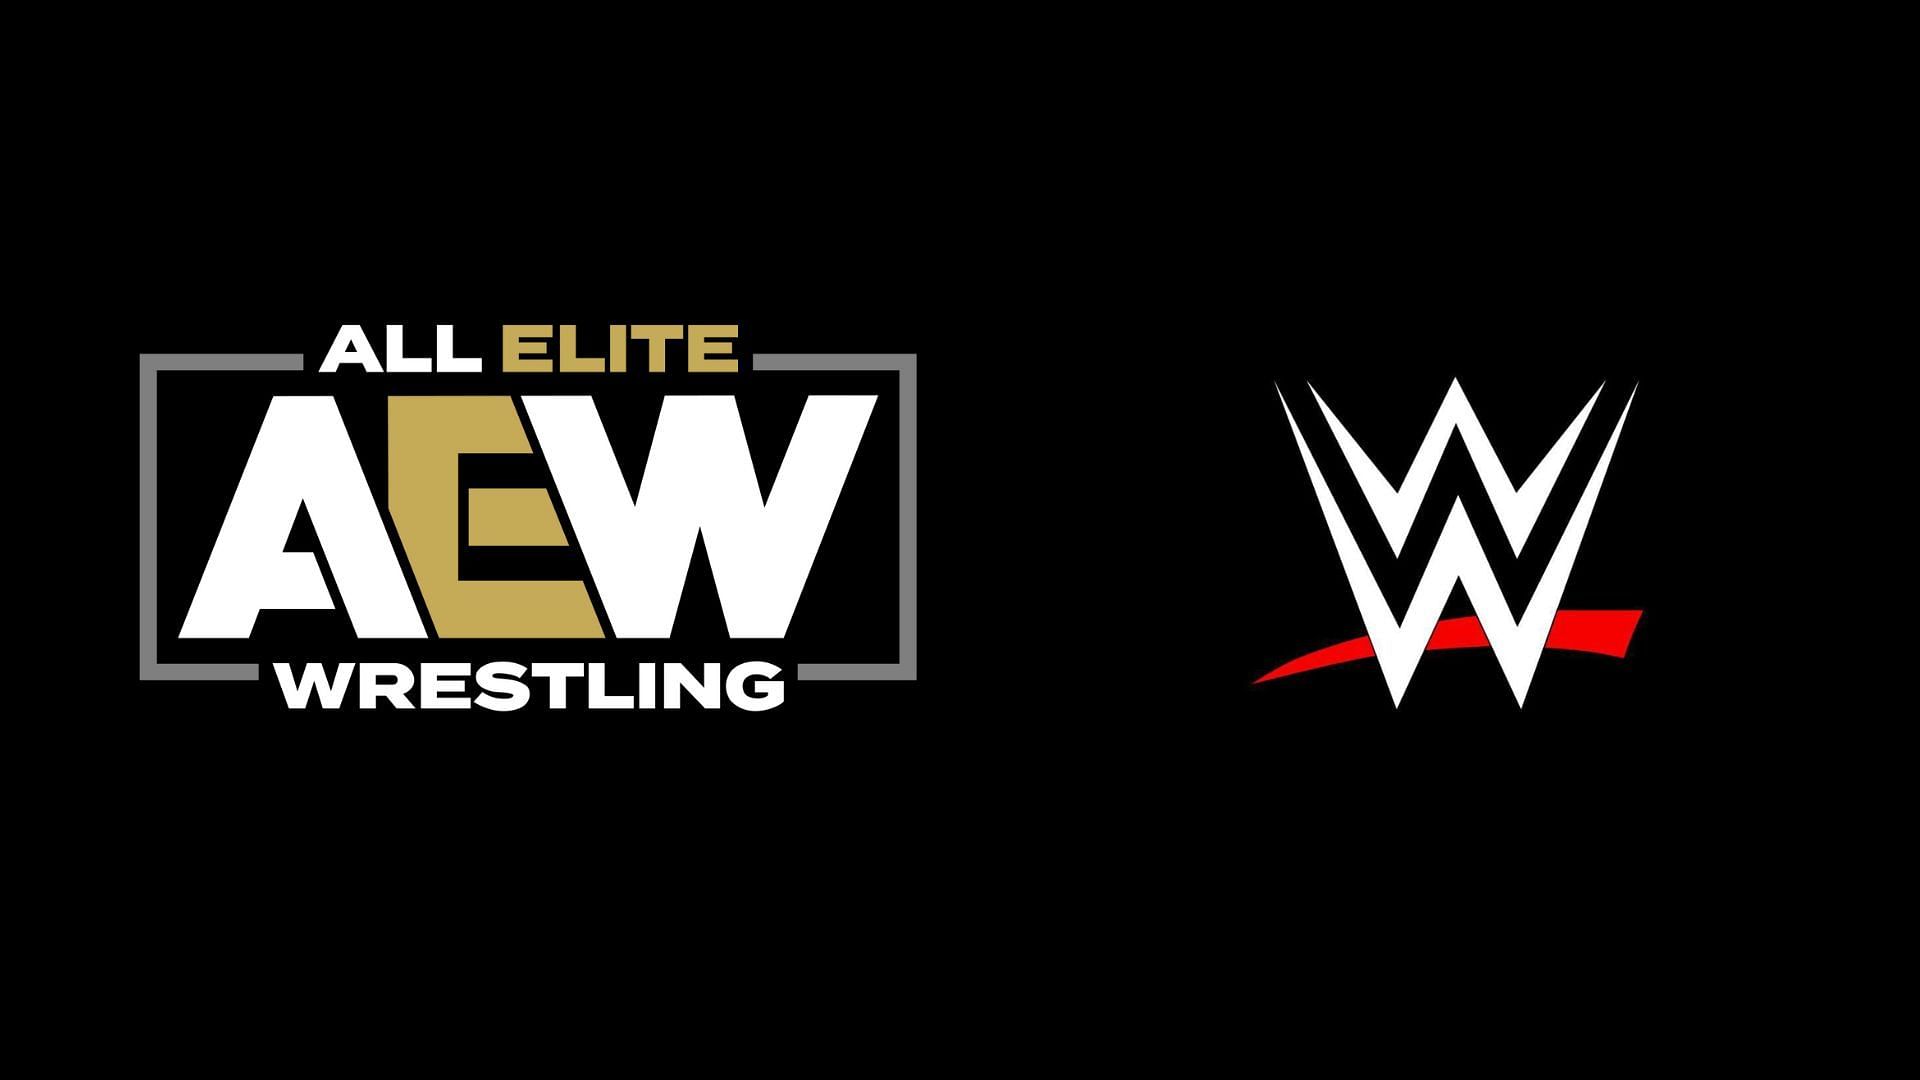 AEW has signed a former WWE personnel